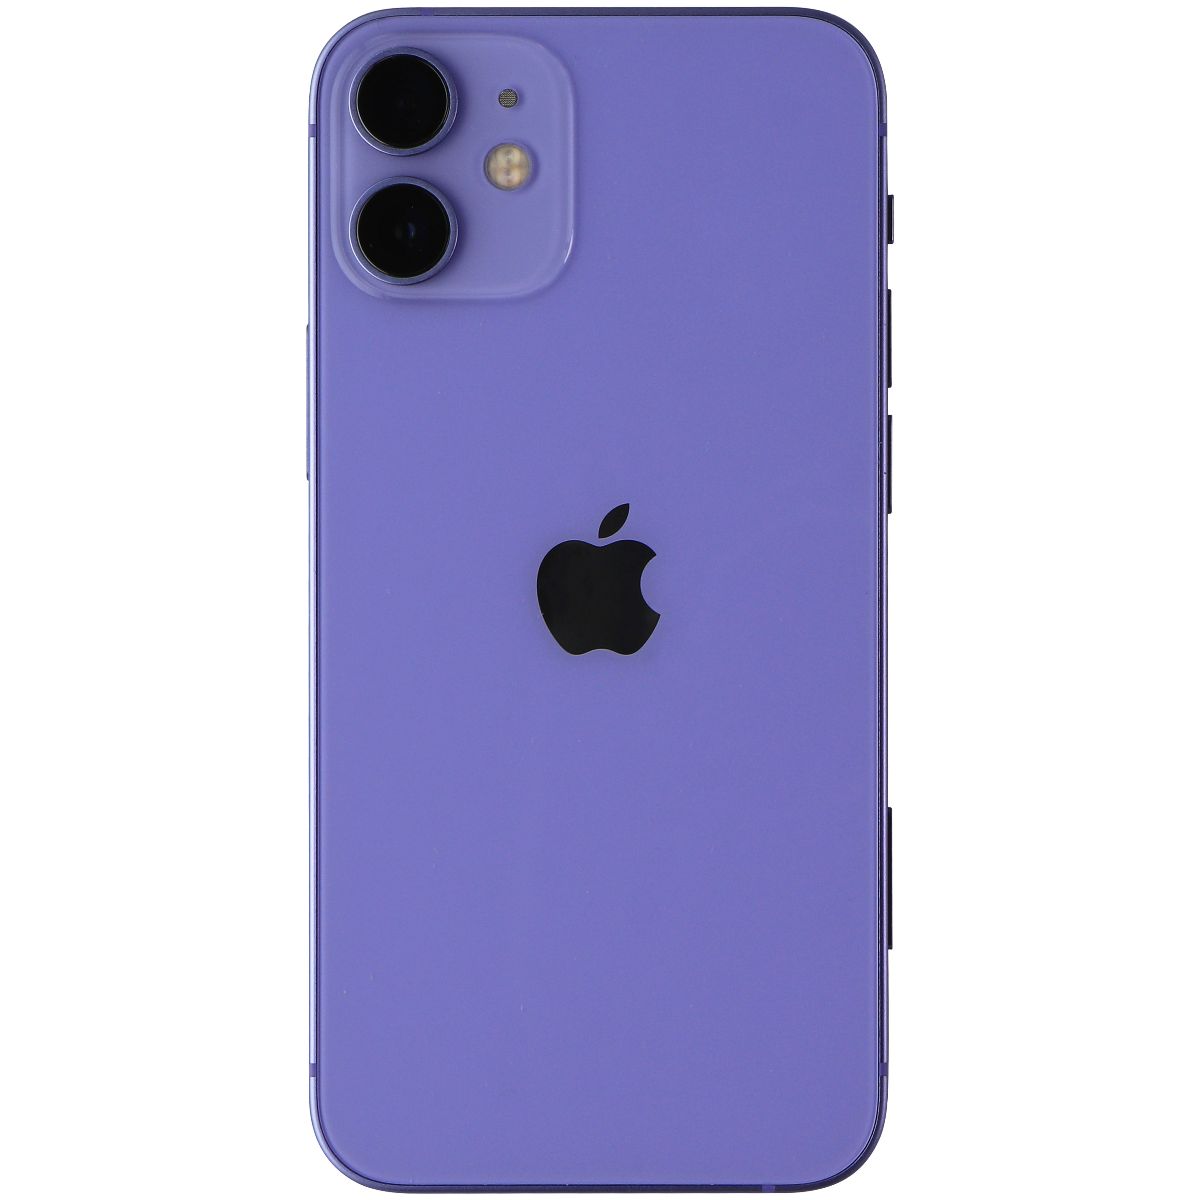 Apple iPhone 12 mini (5.4-inch) (A2176) Spectrum Only - 64GB/Purple *Bad Face ID Cell Phones & Smartphones Apple    - Simple Cell Bulk Wholesale Pricing - USA Seller